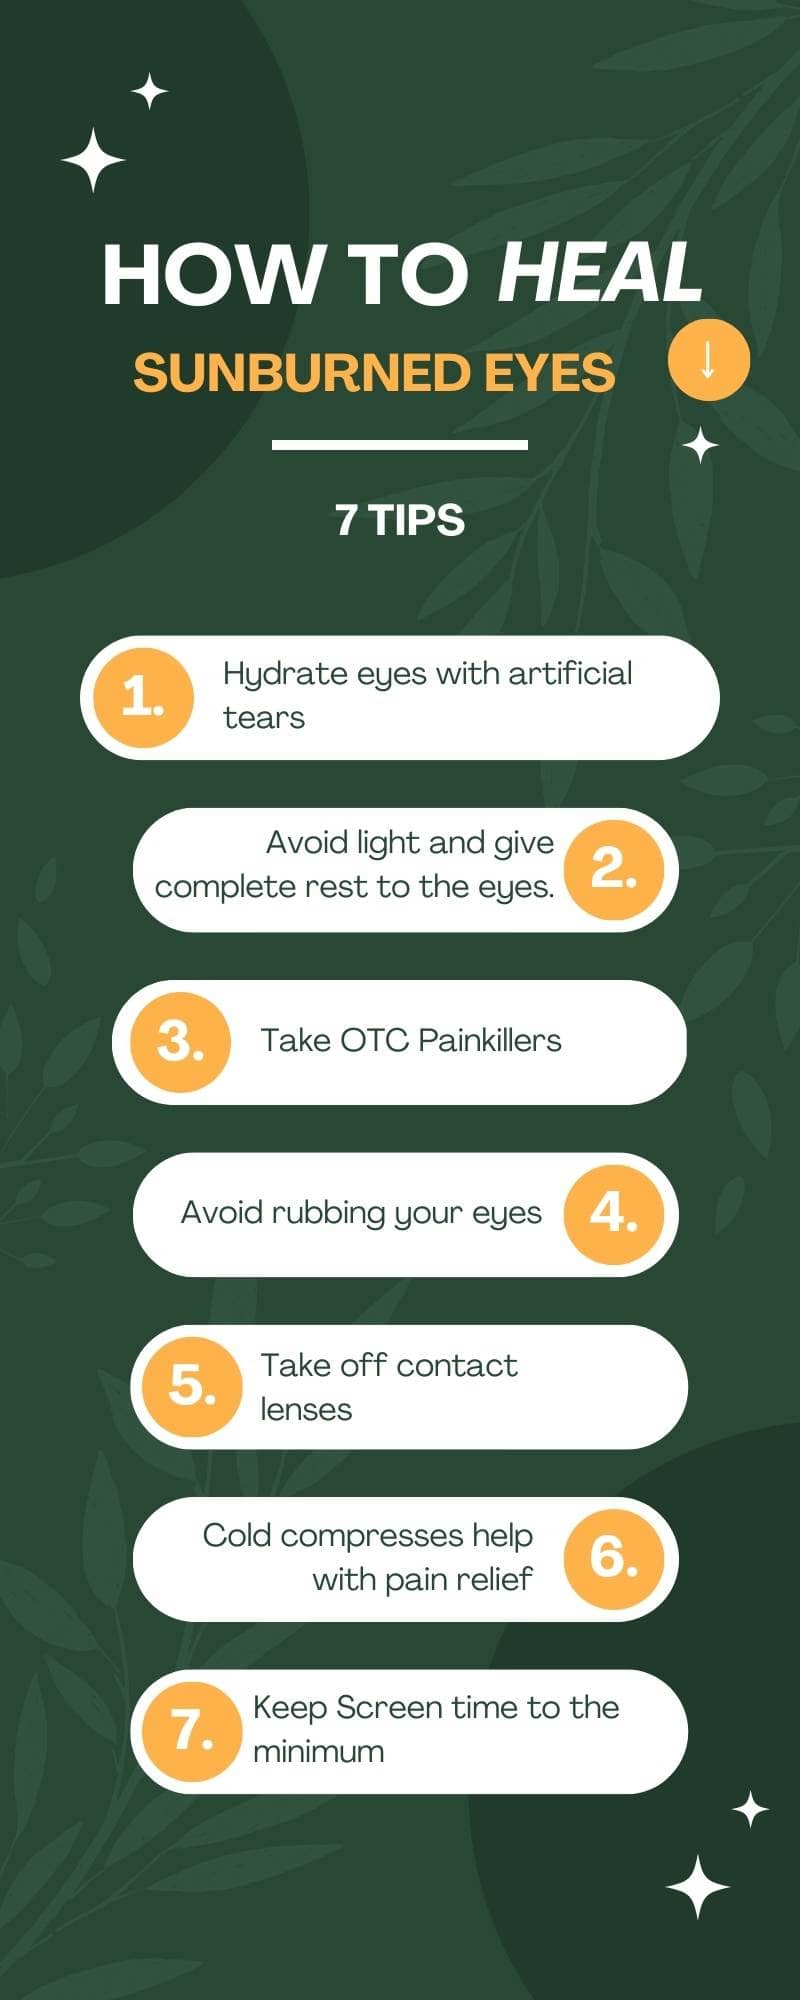 How to Heal sunburned eyes, Steps Infographic